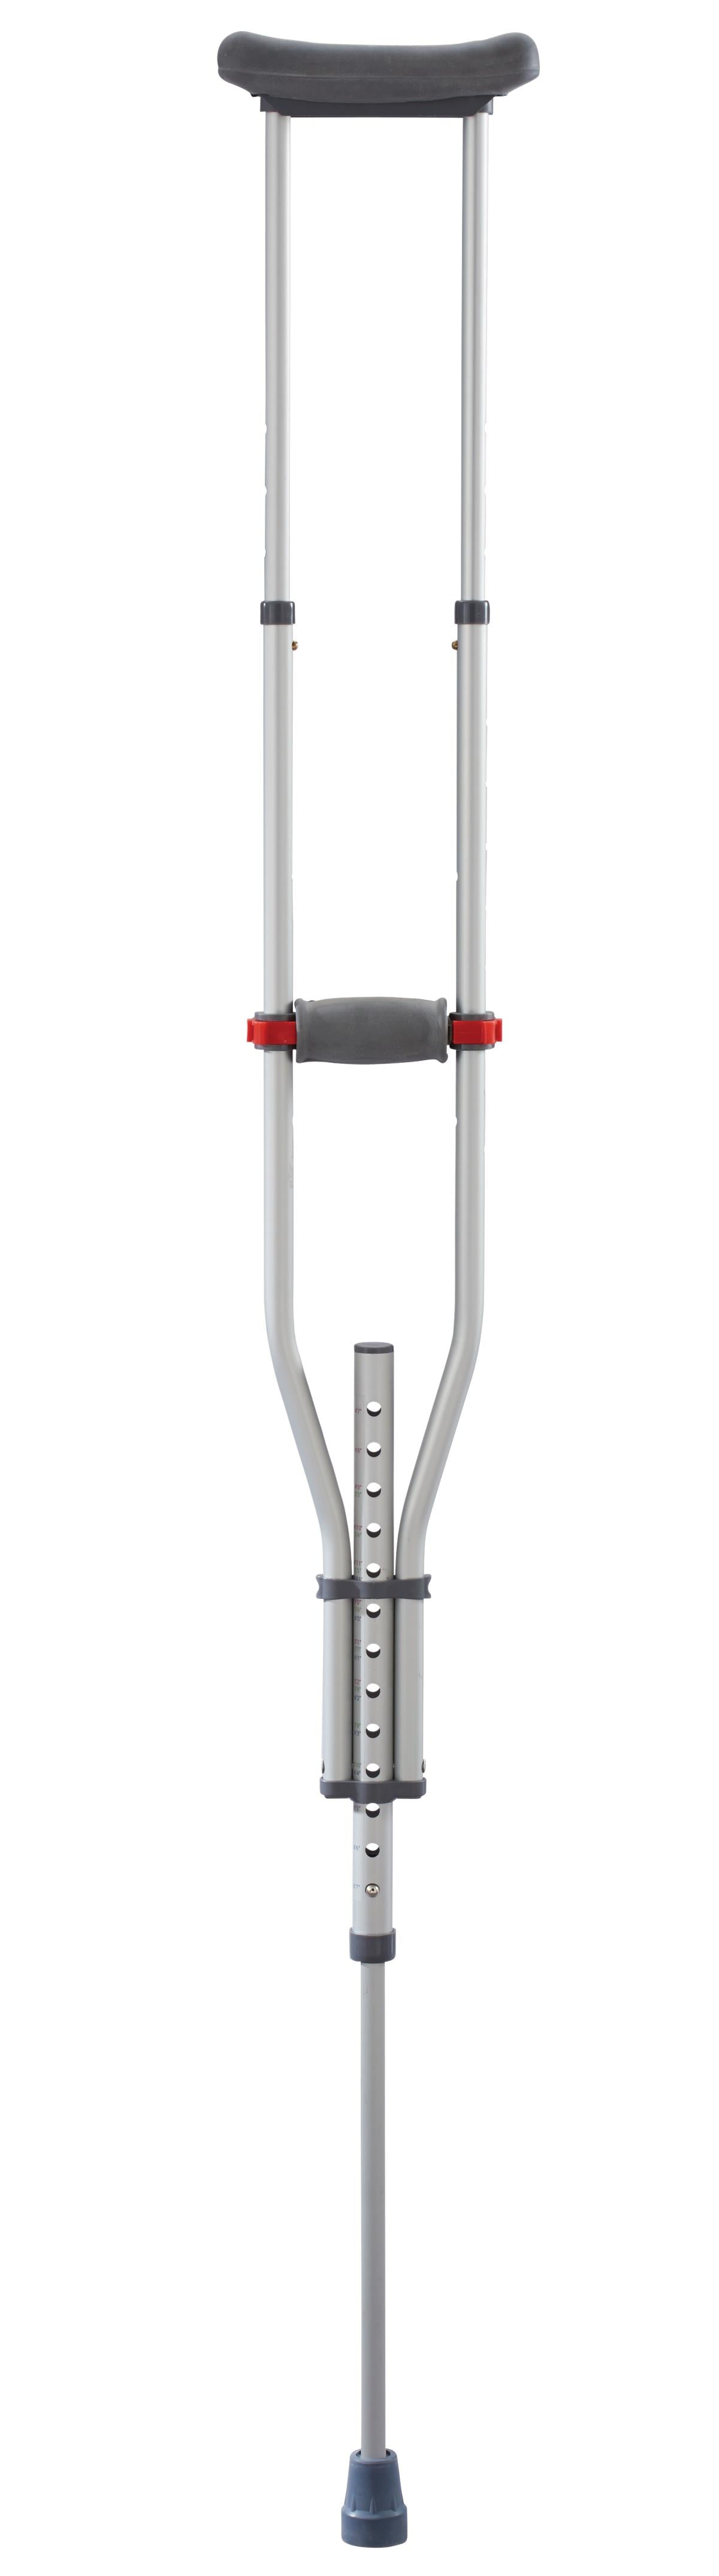 Medline Quick-Fit Aluminum Crutches with Red Dot Hand Grip for heights of 4' 7"-6' 7"